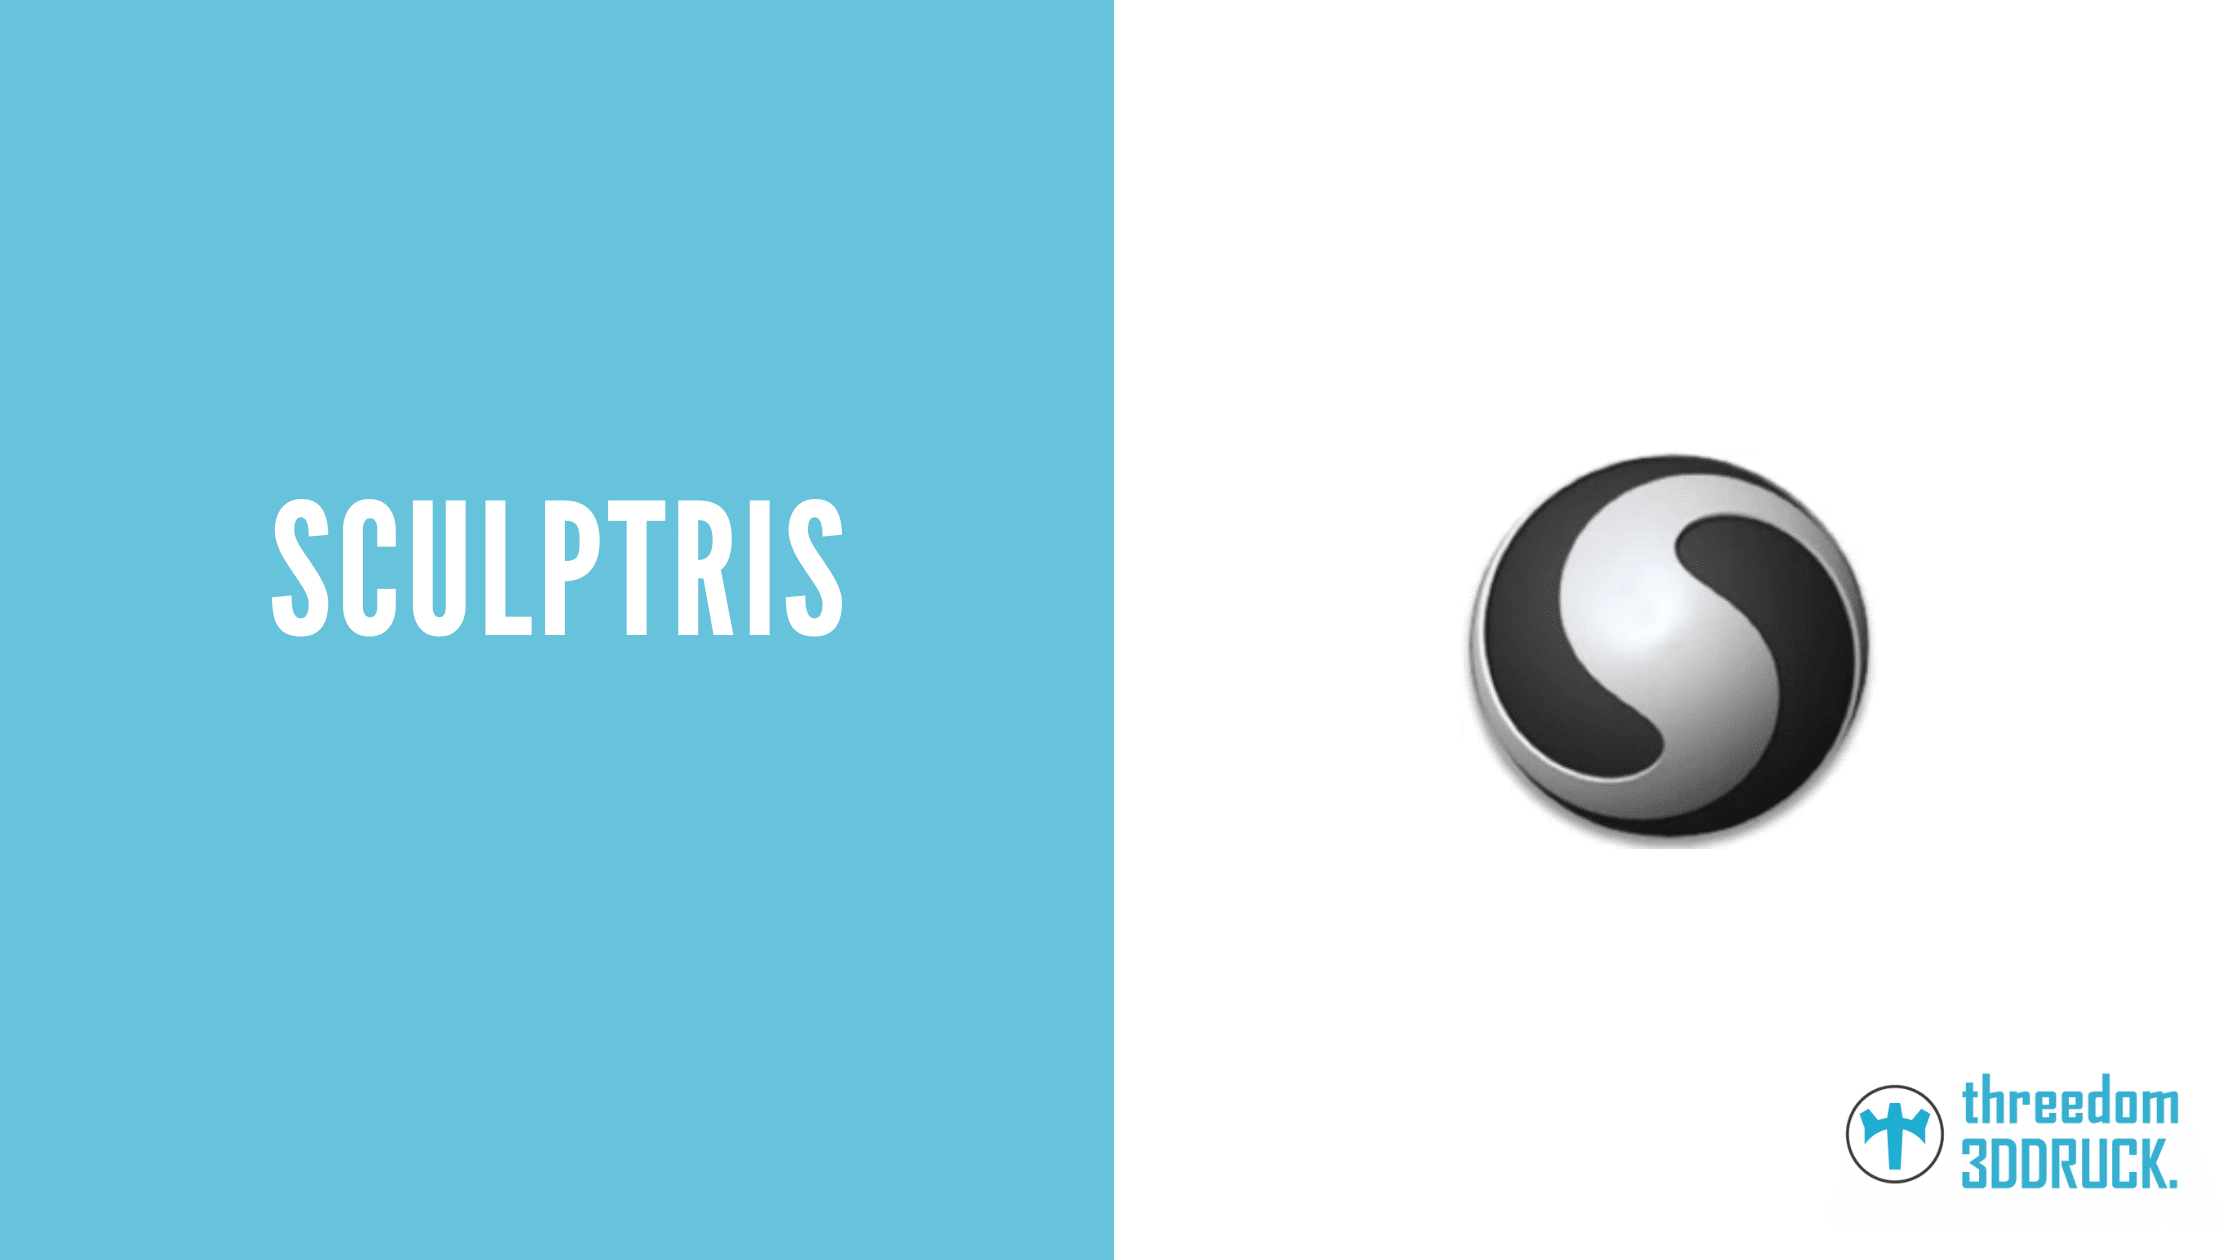 Sculptris: definition, functionality and scope